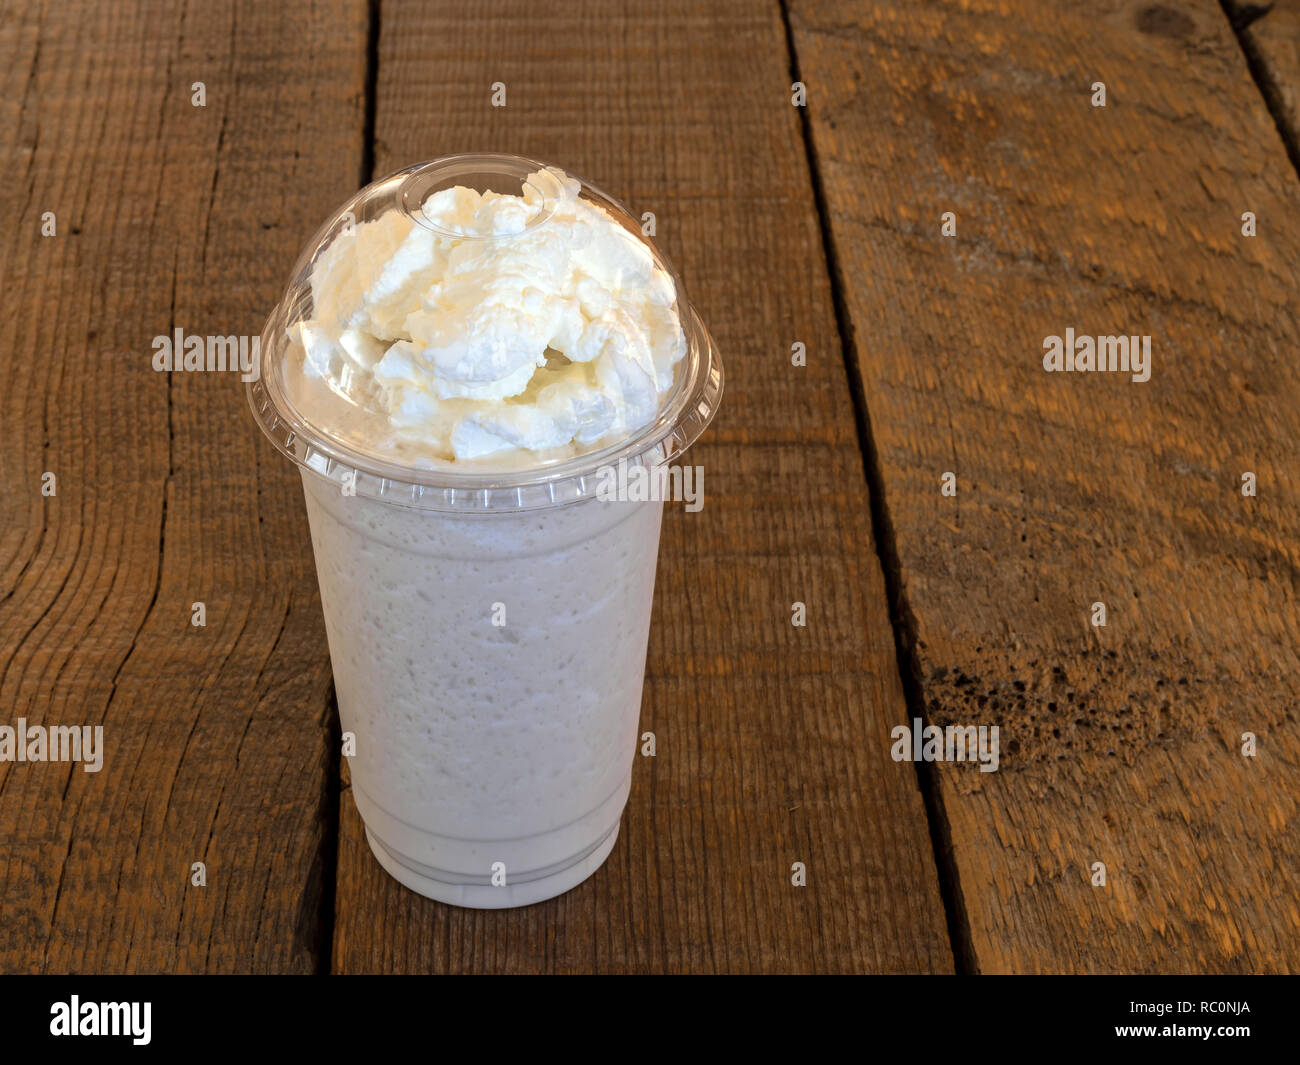 Vanilla Frappe coffee drink in a clear cup with whipped cream on top on a barn wood background with copy space. Stock Photo